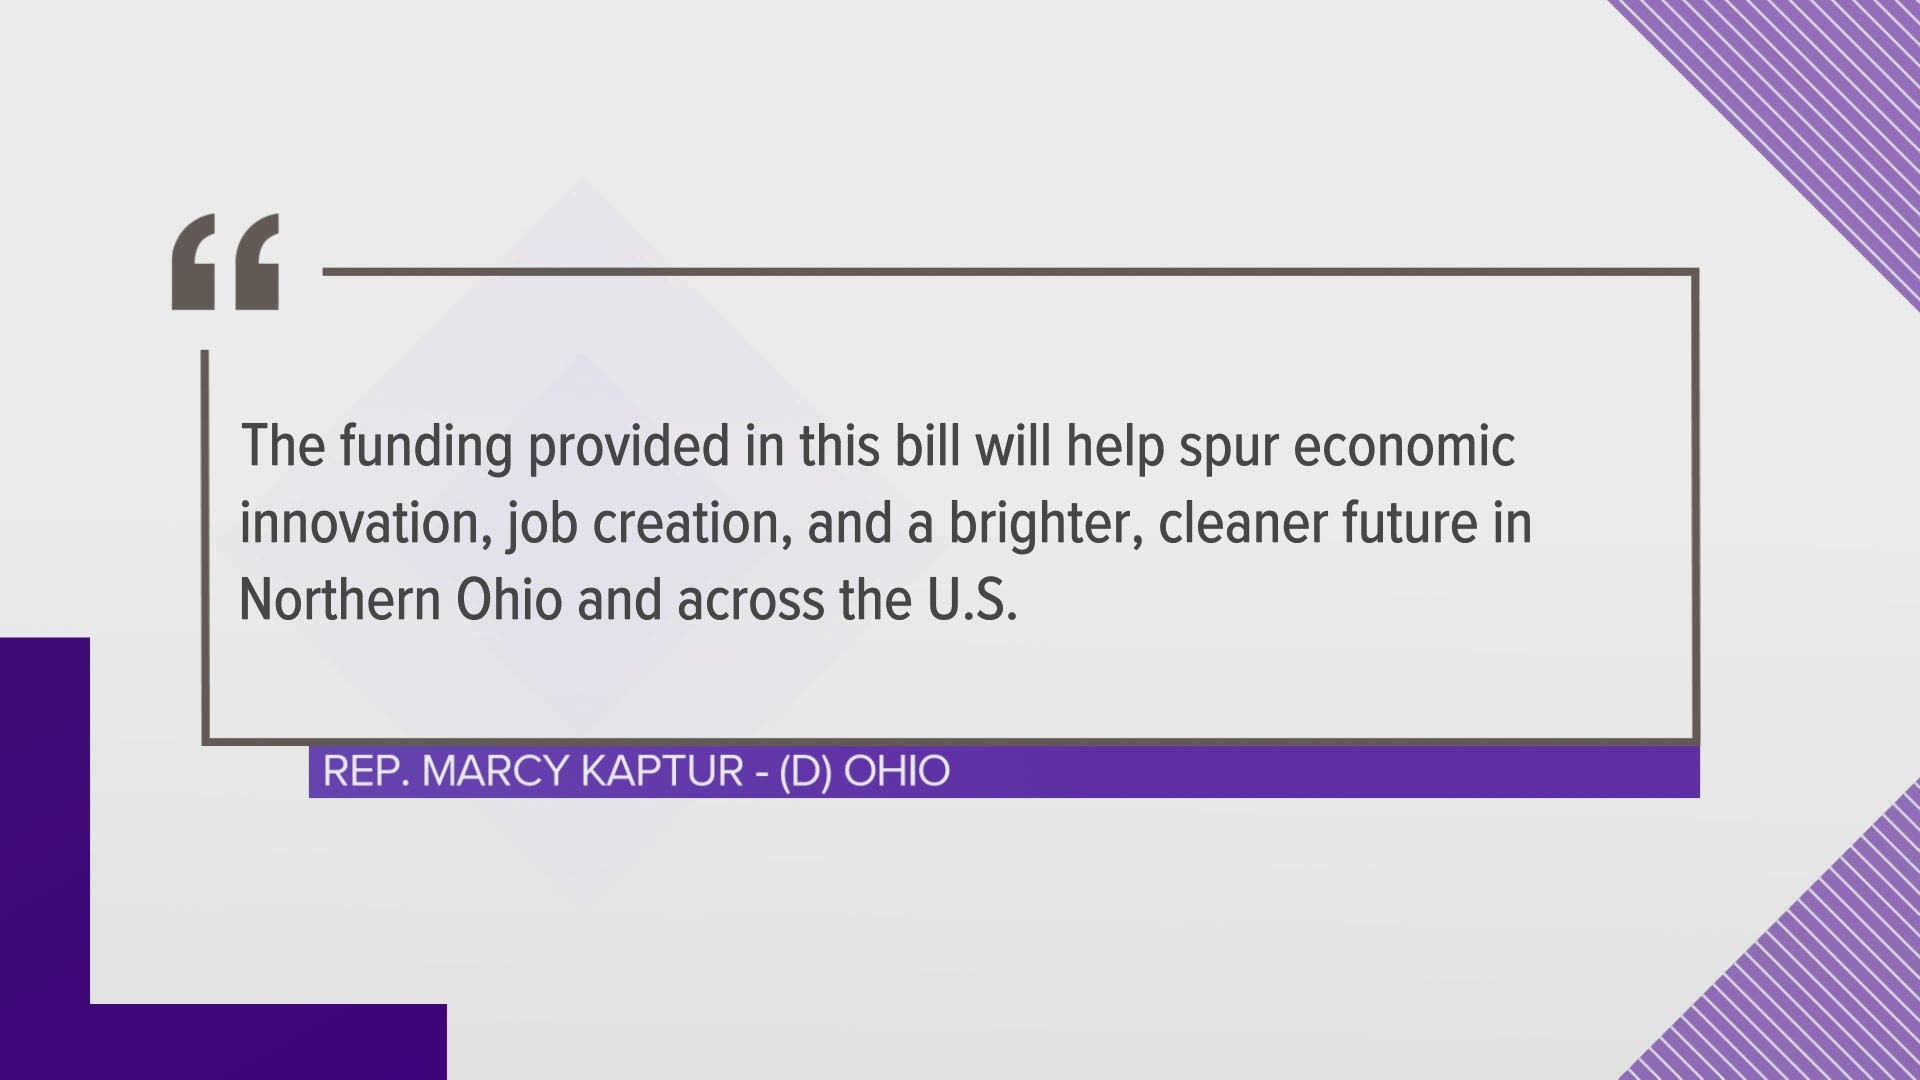 The legislation involves Great Lakes and clean energy initiatives and passed Monday as part of the COVID-19 relief bill. The bill now heads to the President's desk.